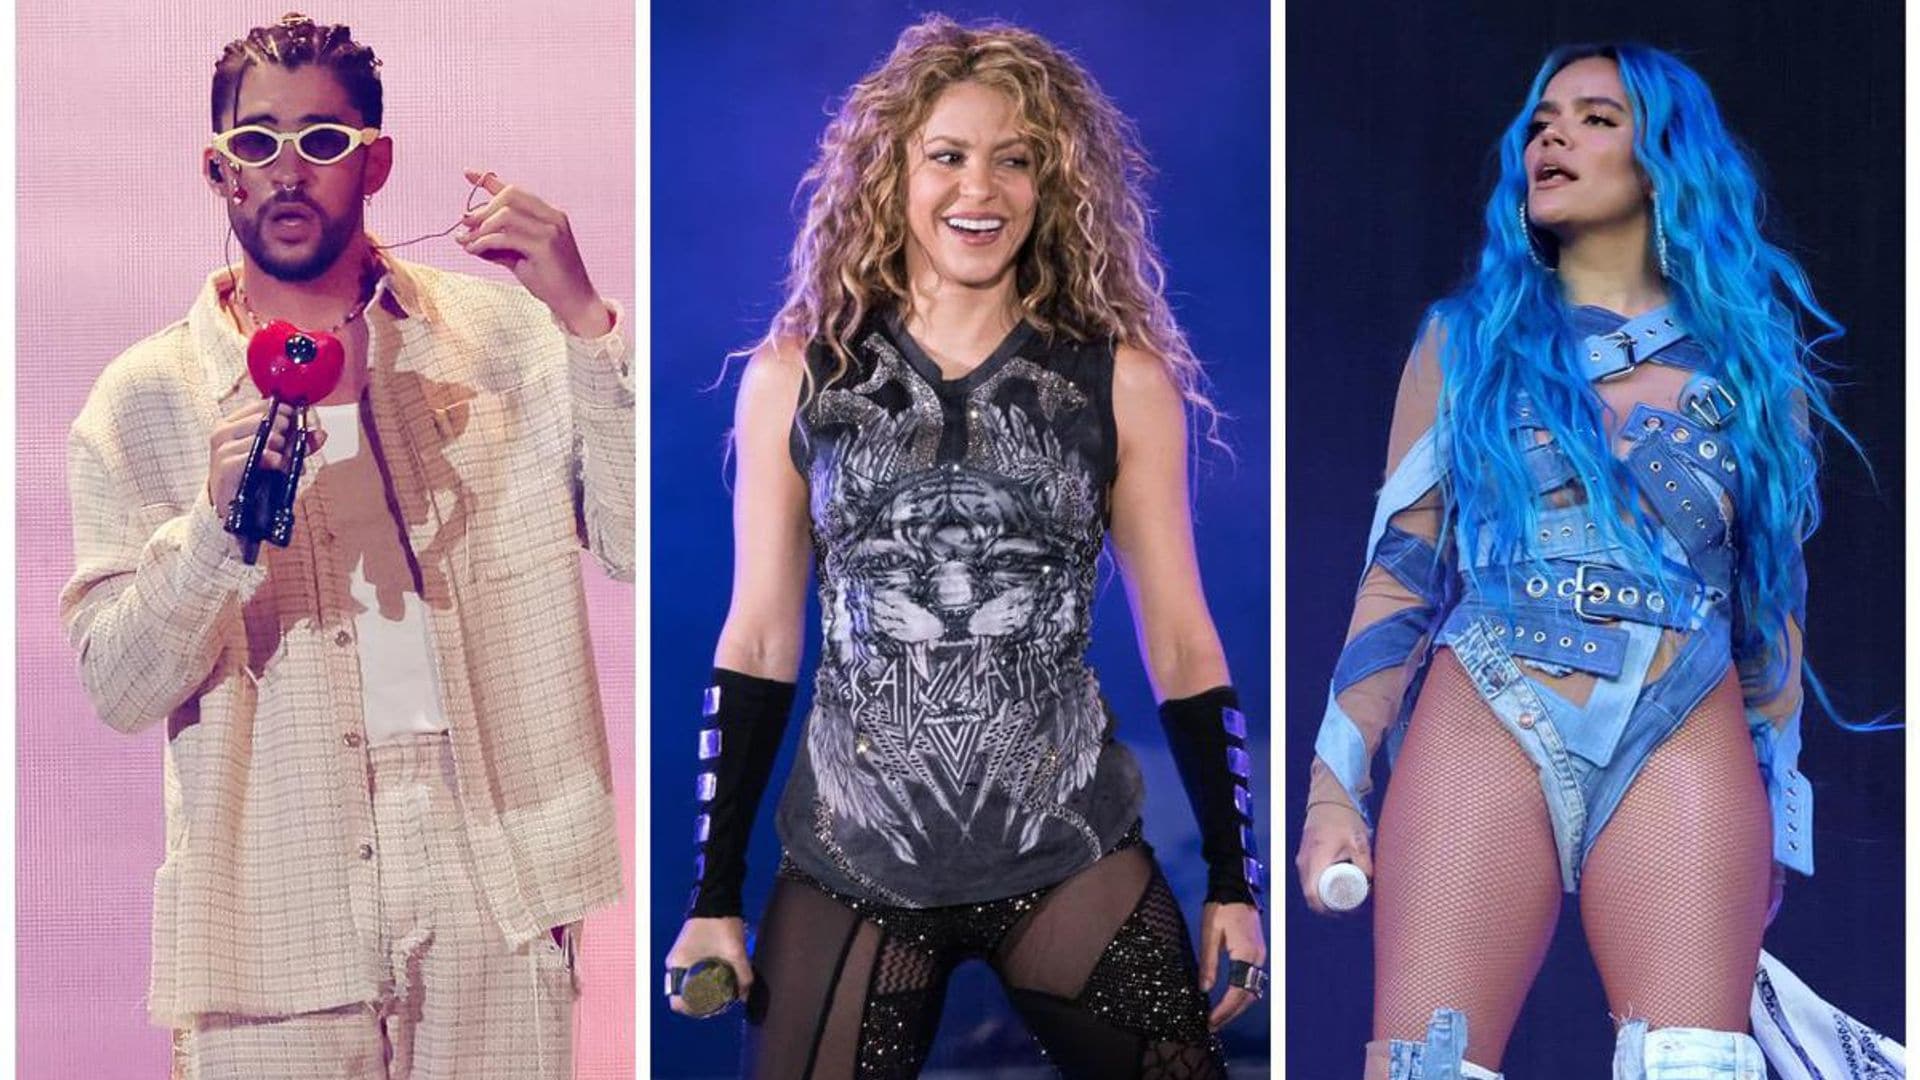 Bad Bunny, Shakira, and Karol G feature on the list of Spotify’s most streamed songs of the summer globally